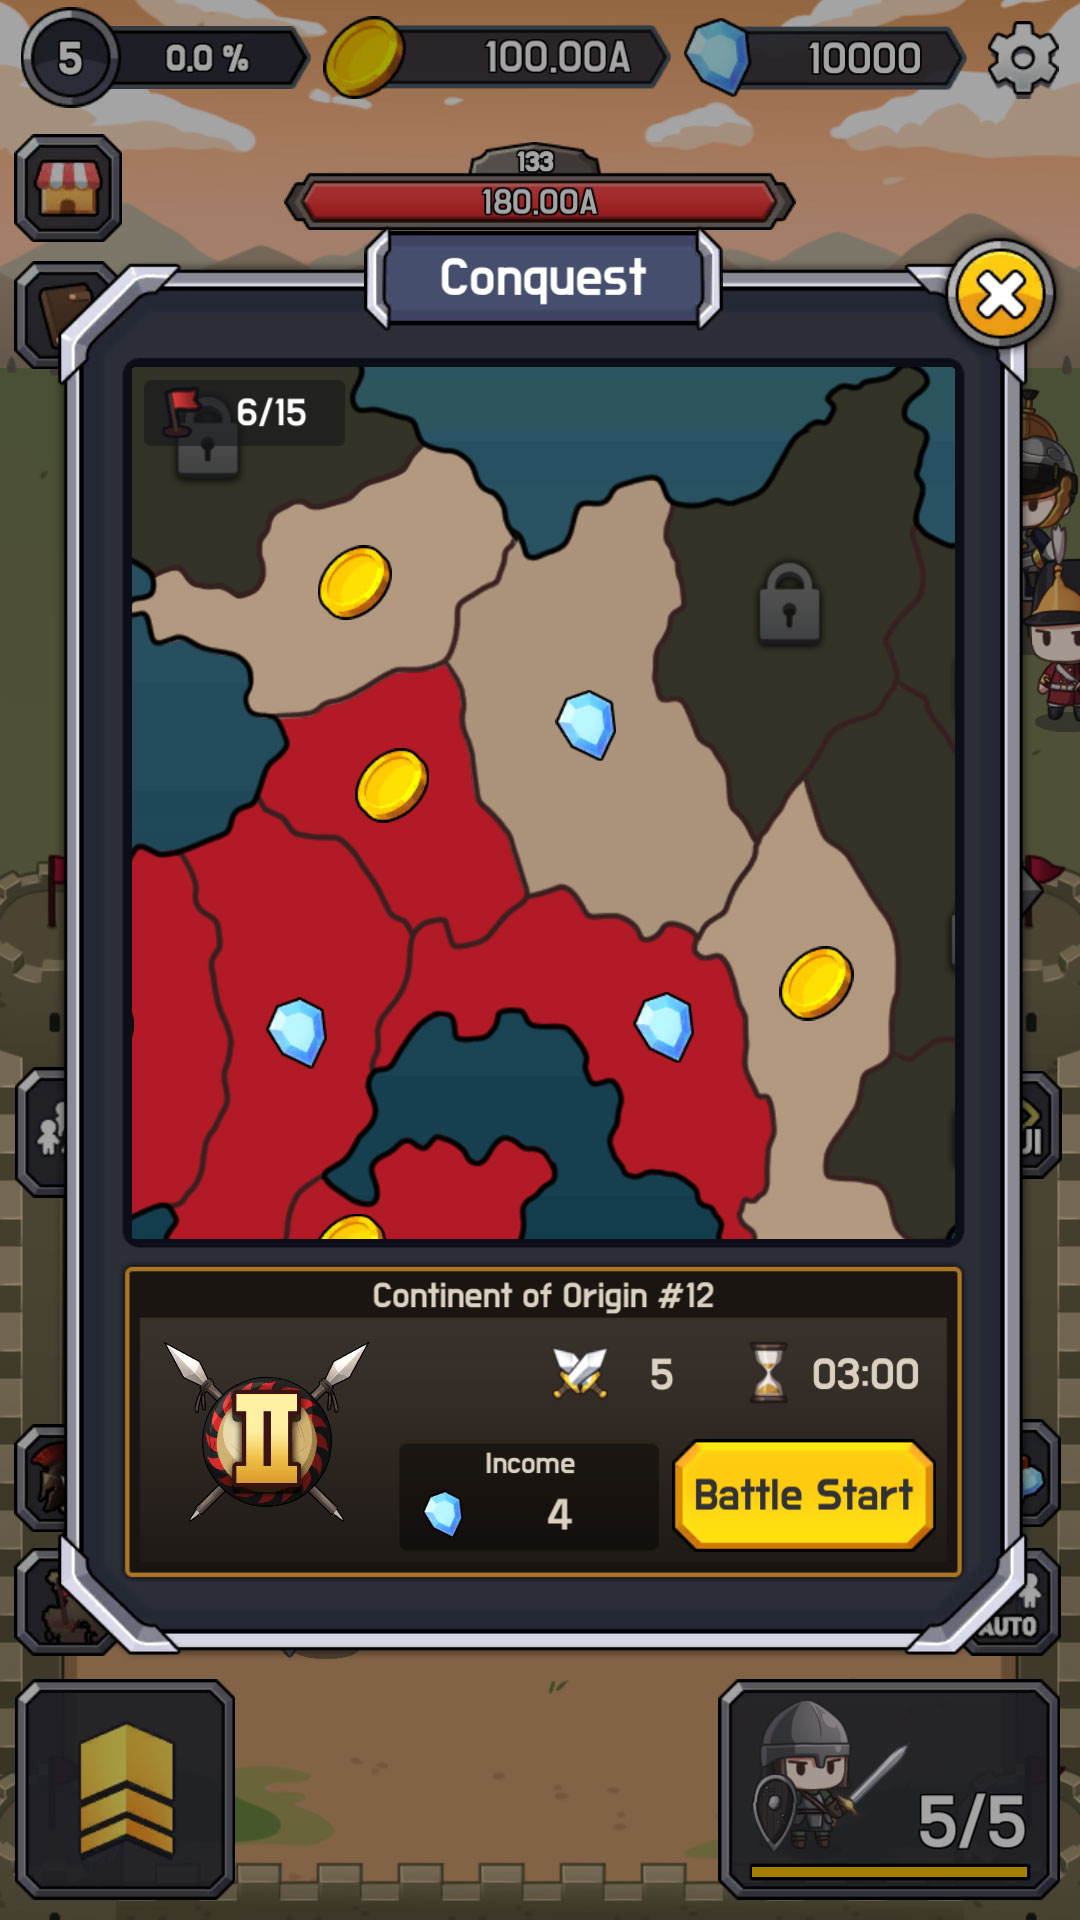 The army idle strategy game. Idle Civilization: игра-кликер. Idle Civilization 2. Civilization Army merge. Игра режим Бога.